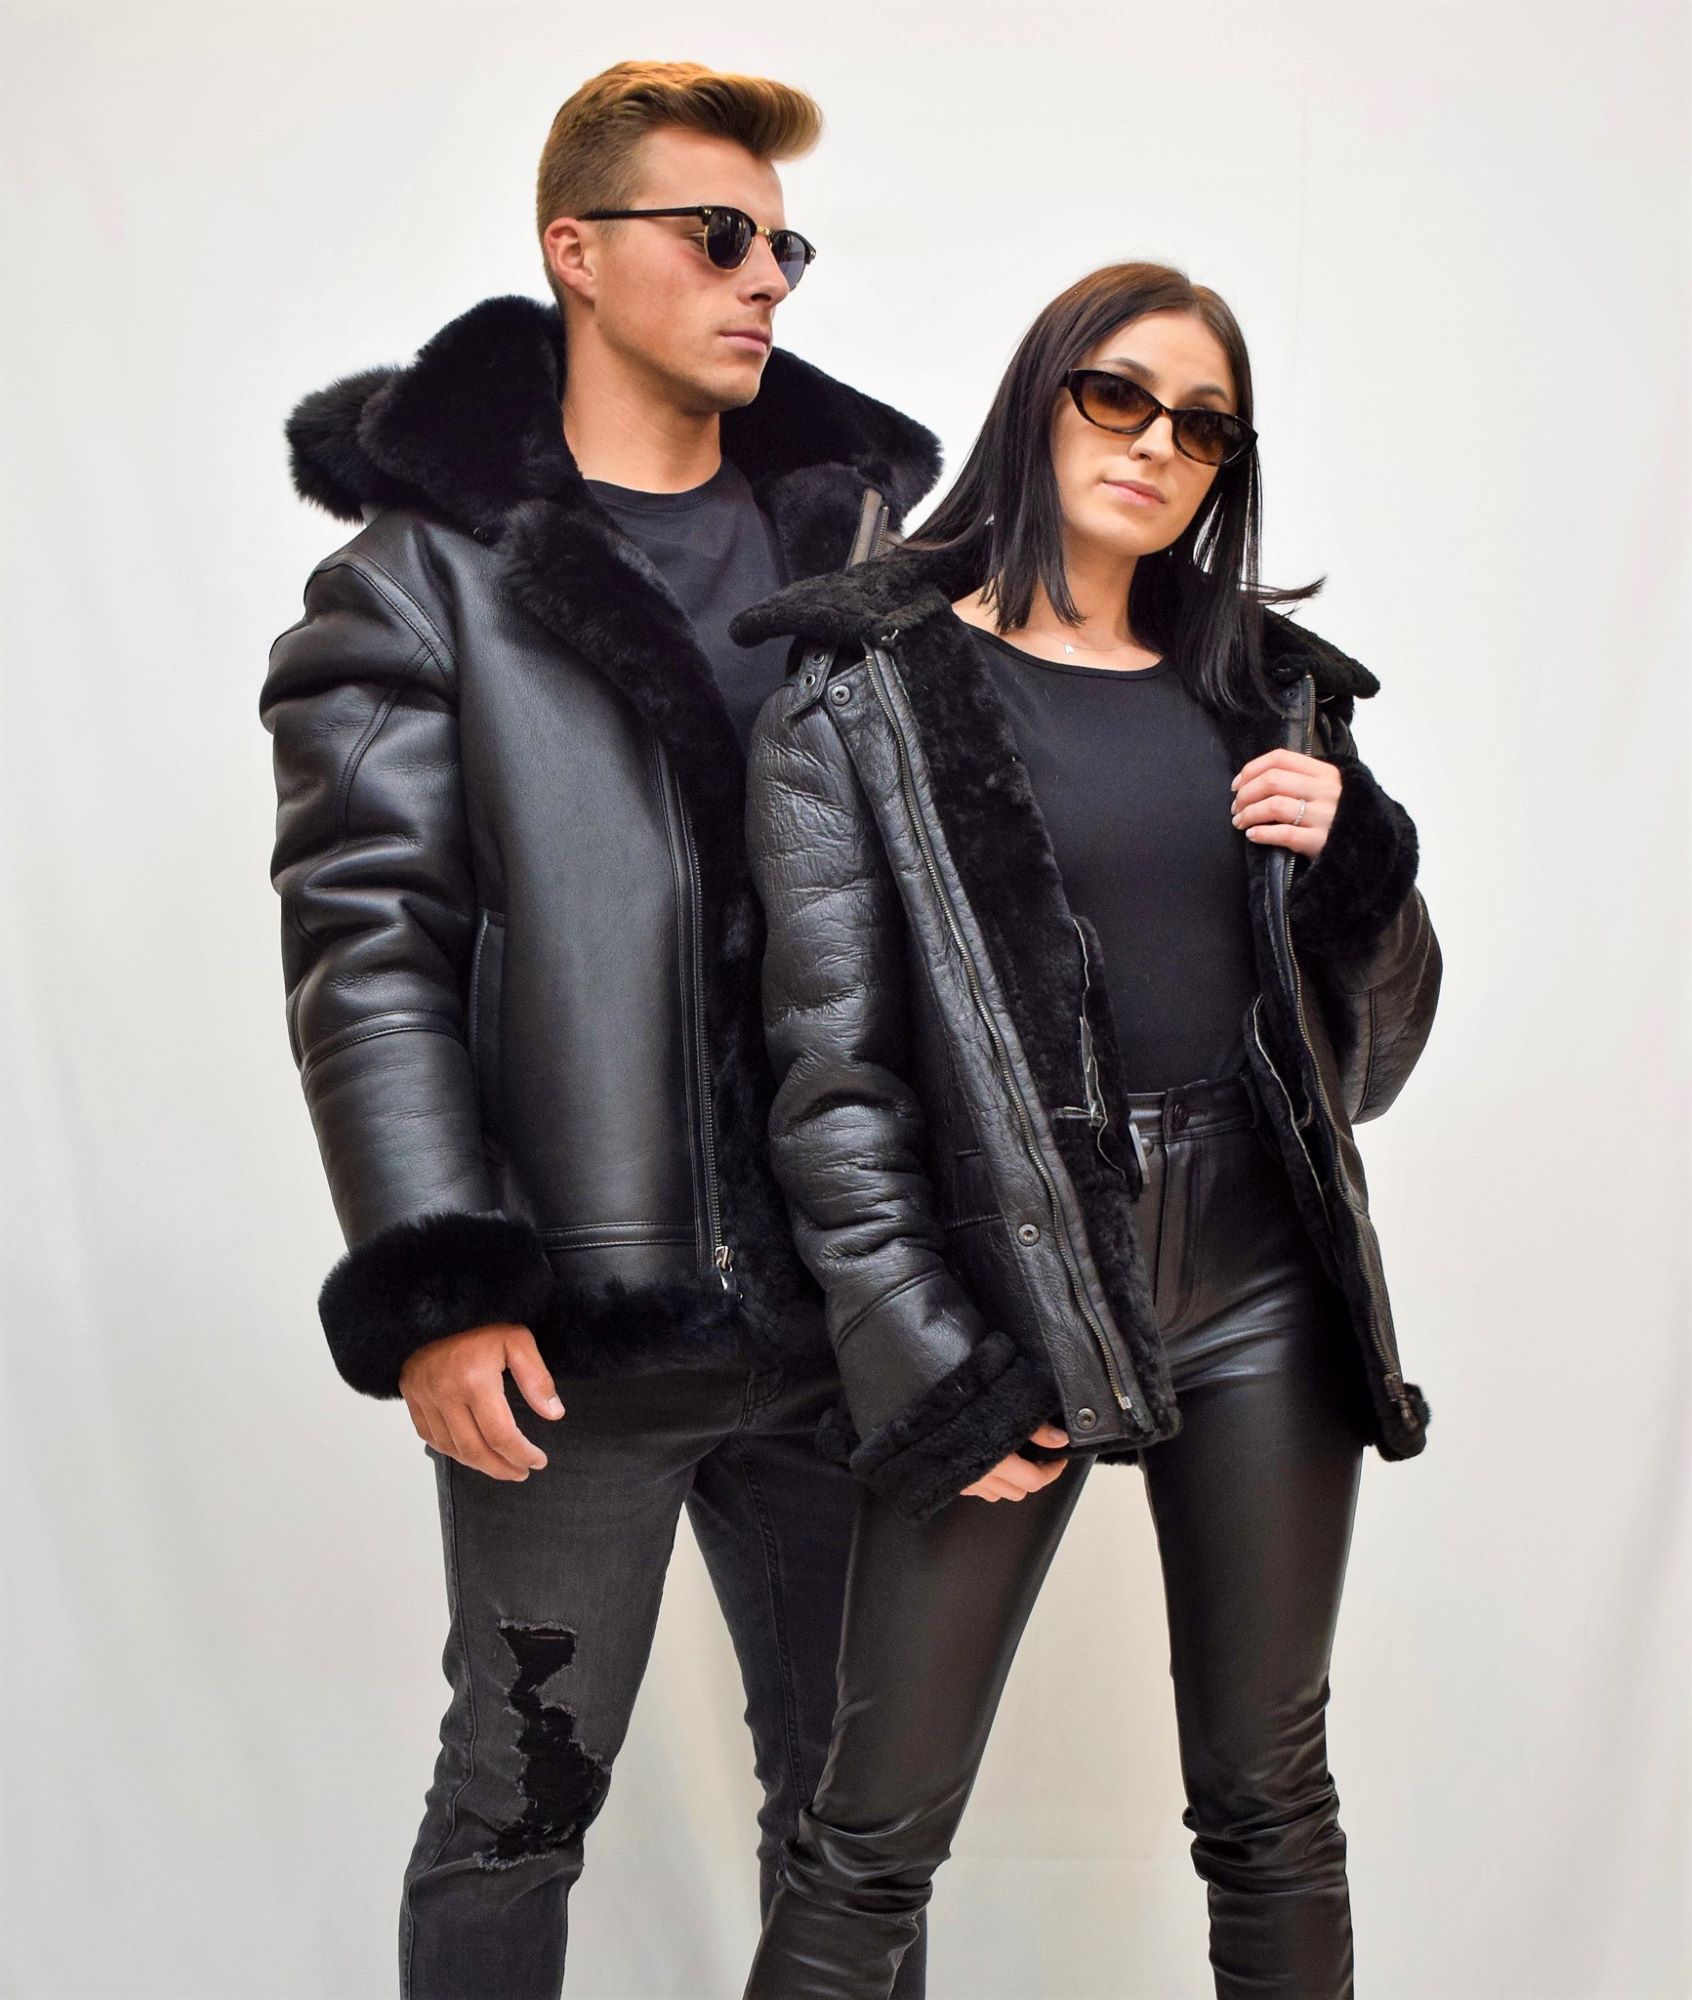 Man and woman both wearing fur lined leather jackets posing together with sunglasses